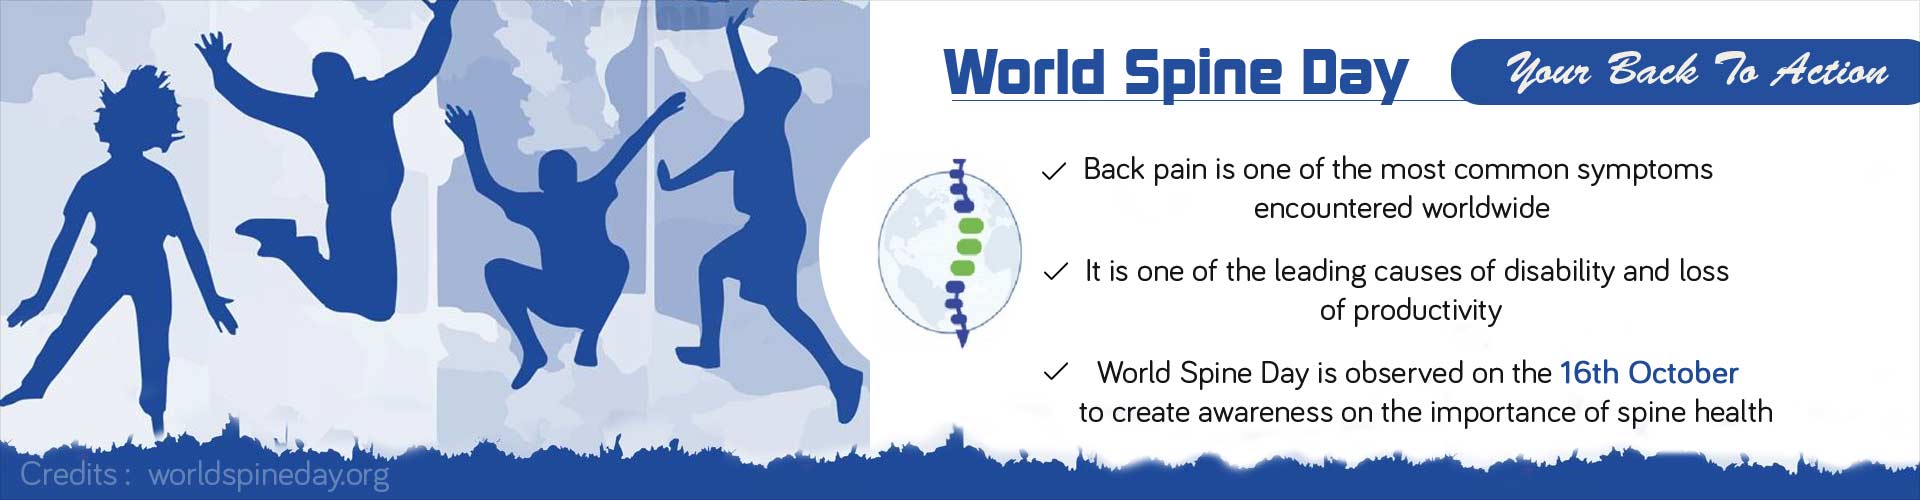 World Spine Day: Your Back to Action
- Back pain is one of the most common symptoms encountered worldwide
- It is one of the leading causes of disability and loss of productivity
- World Spine Day is observed on the 16th October to create awareness on the importance of spine health
